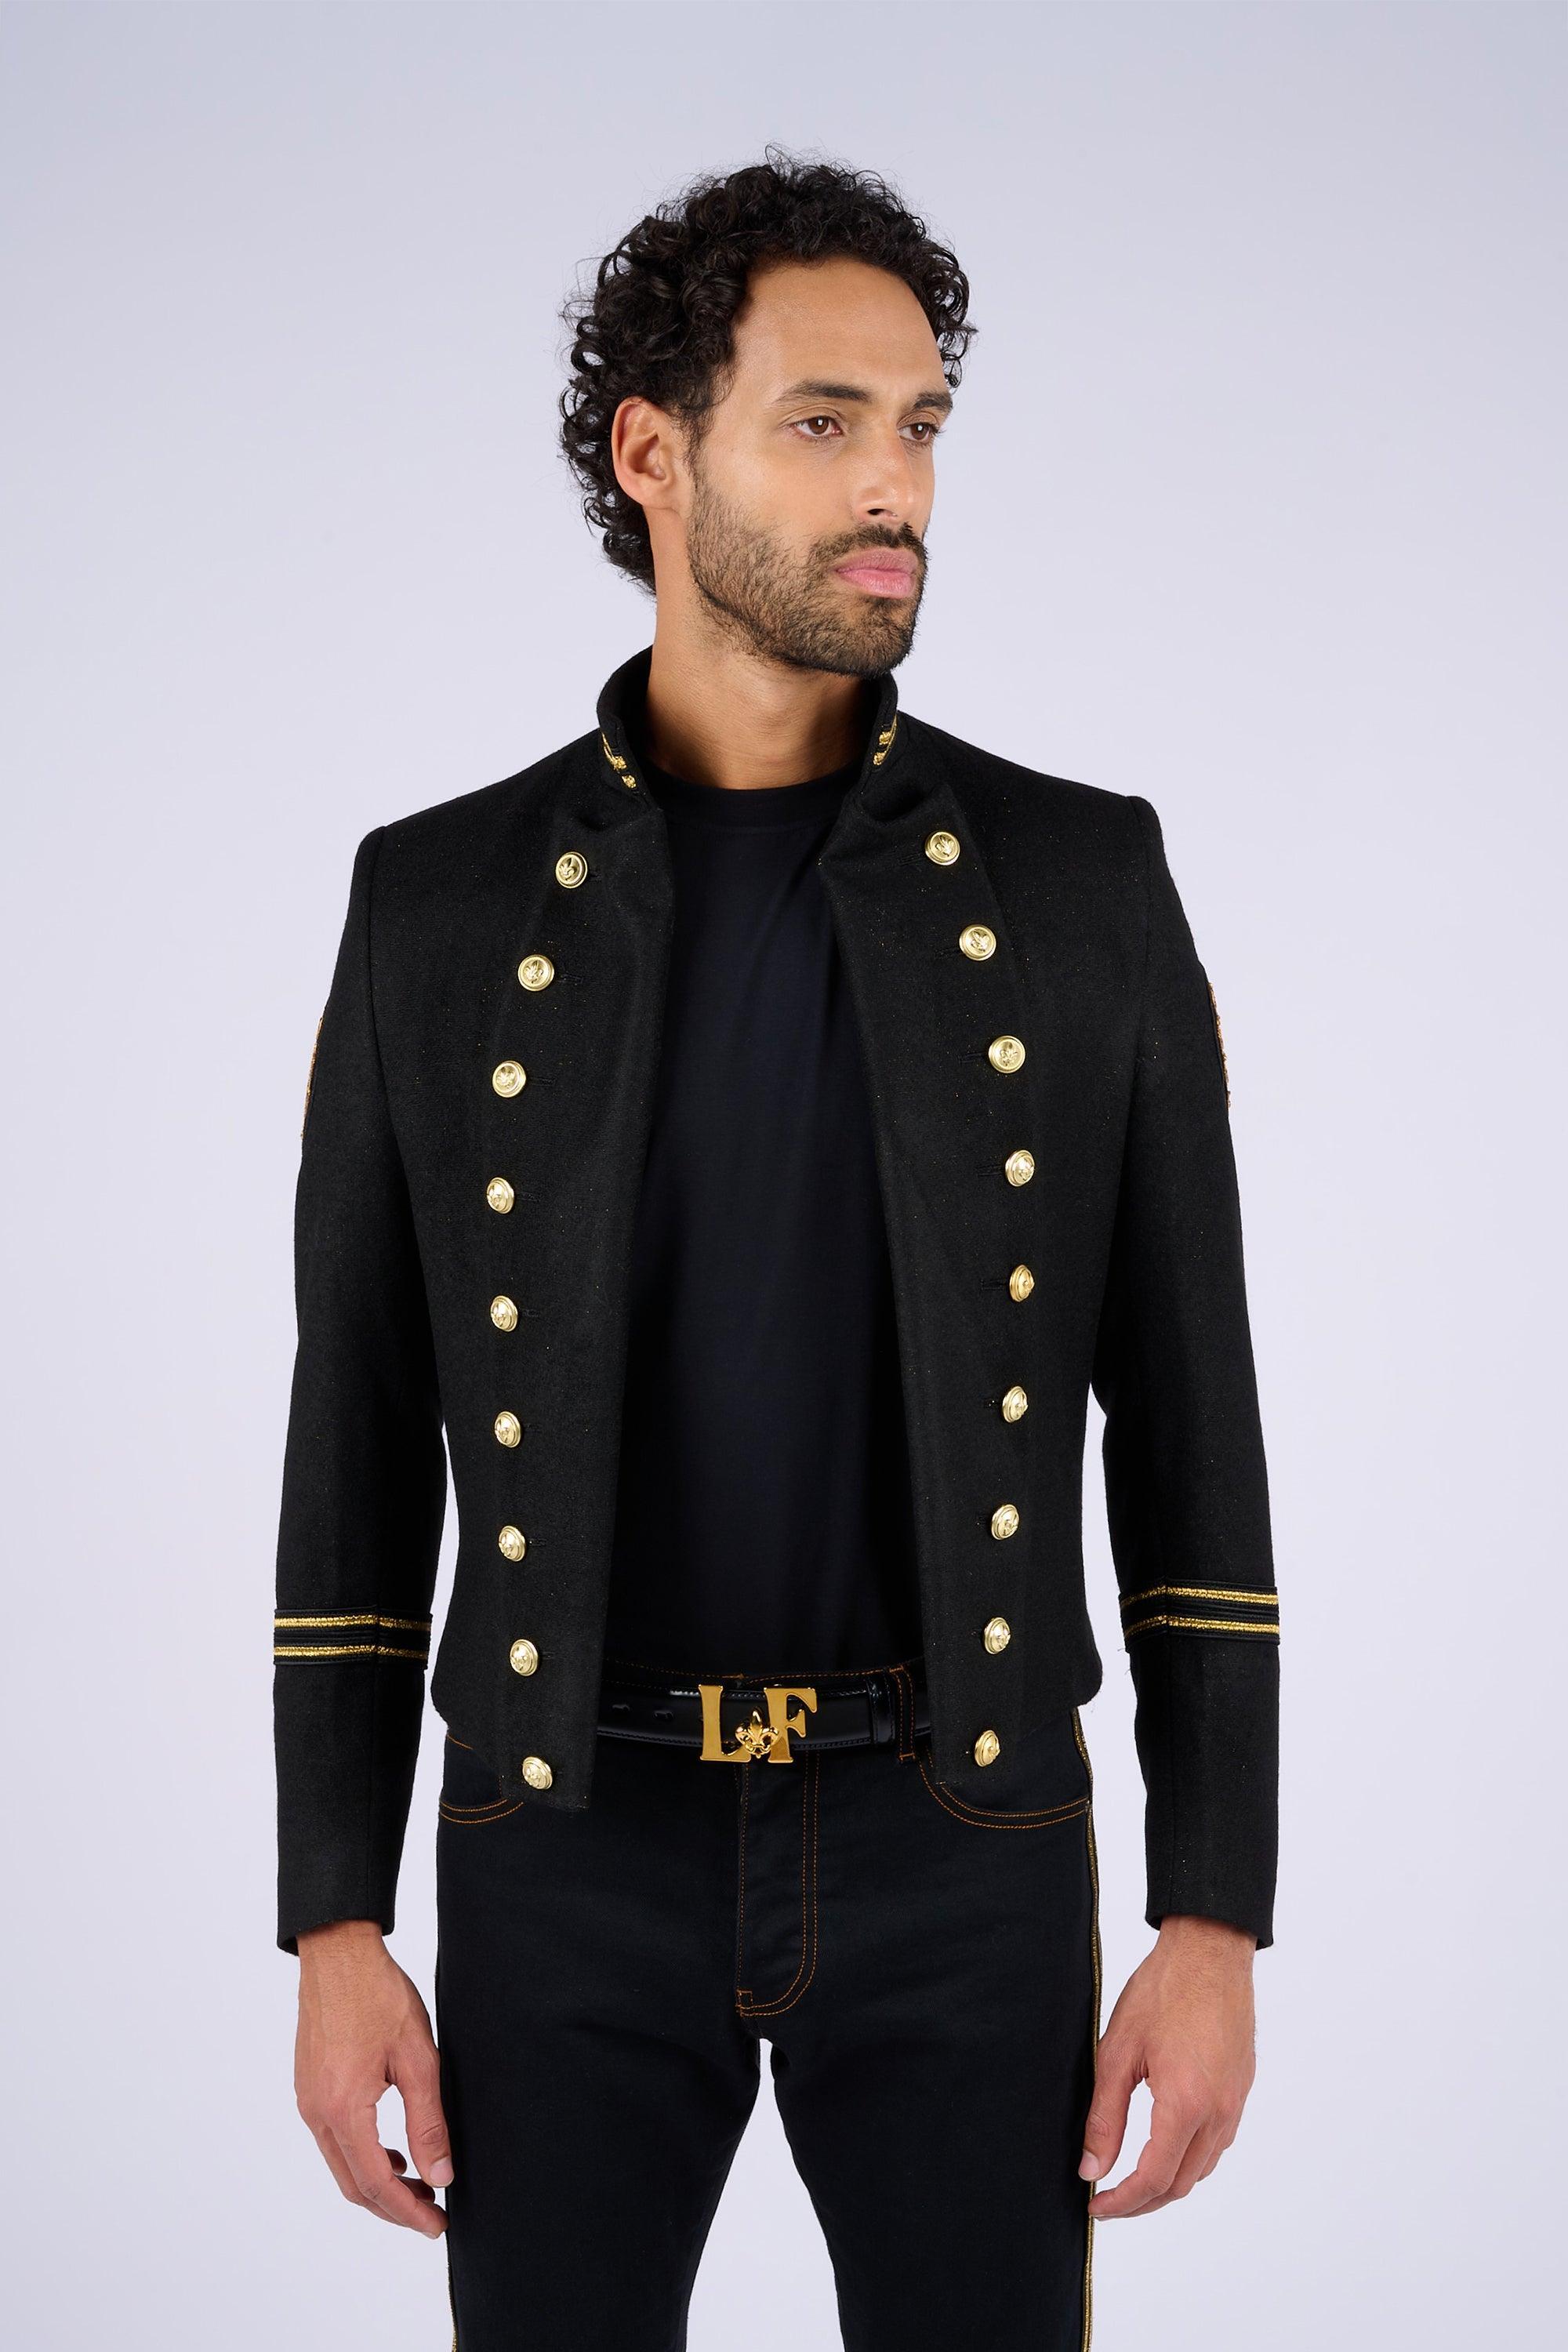 Manteau Hussard - Lords & Fools bonaparte, dandy, elegance, empire, frenchstyle, menfashion, menstyle, New collection, suit, tailoring